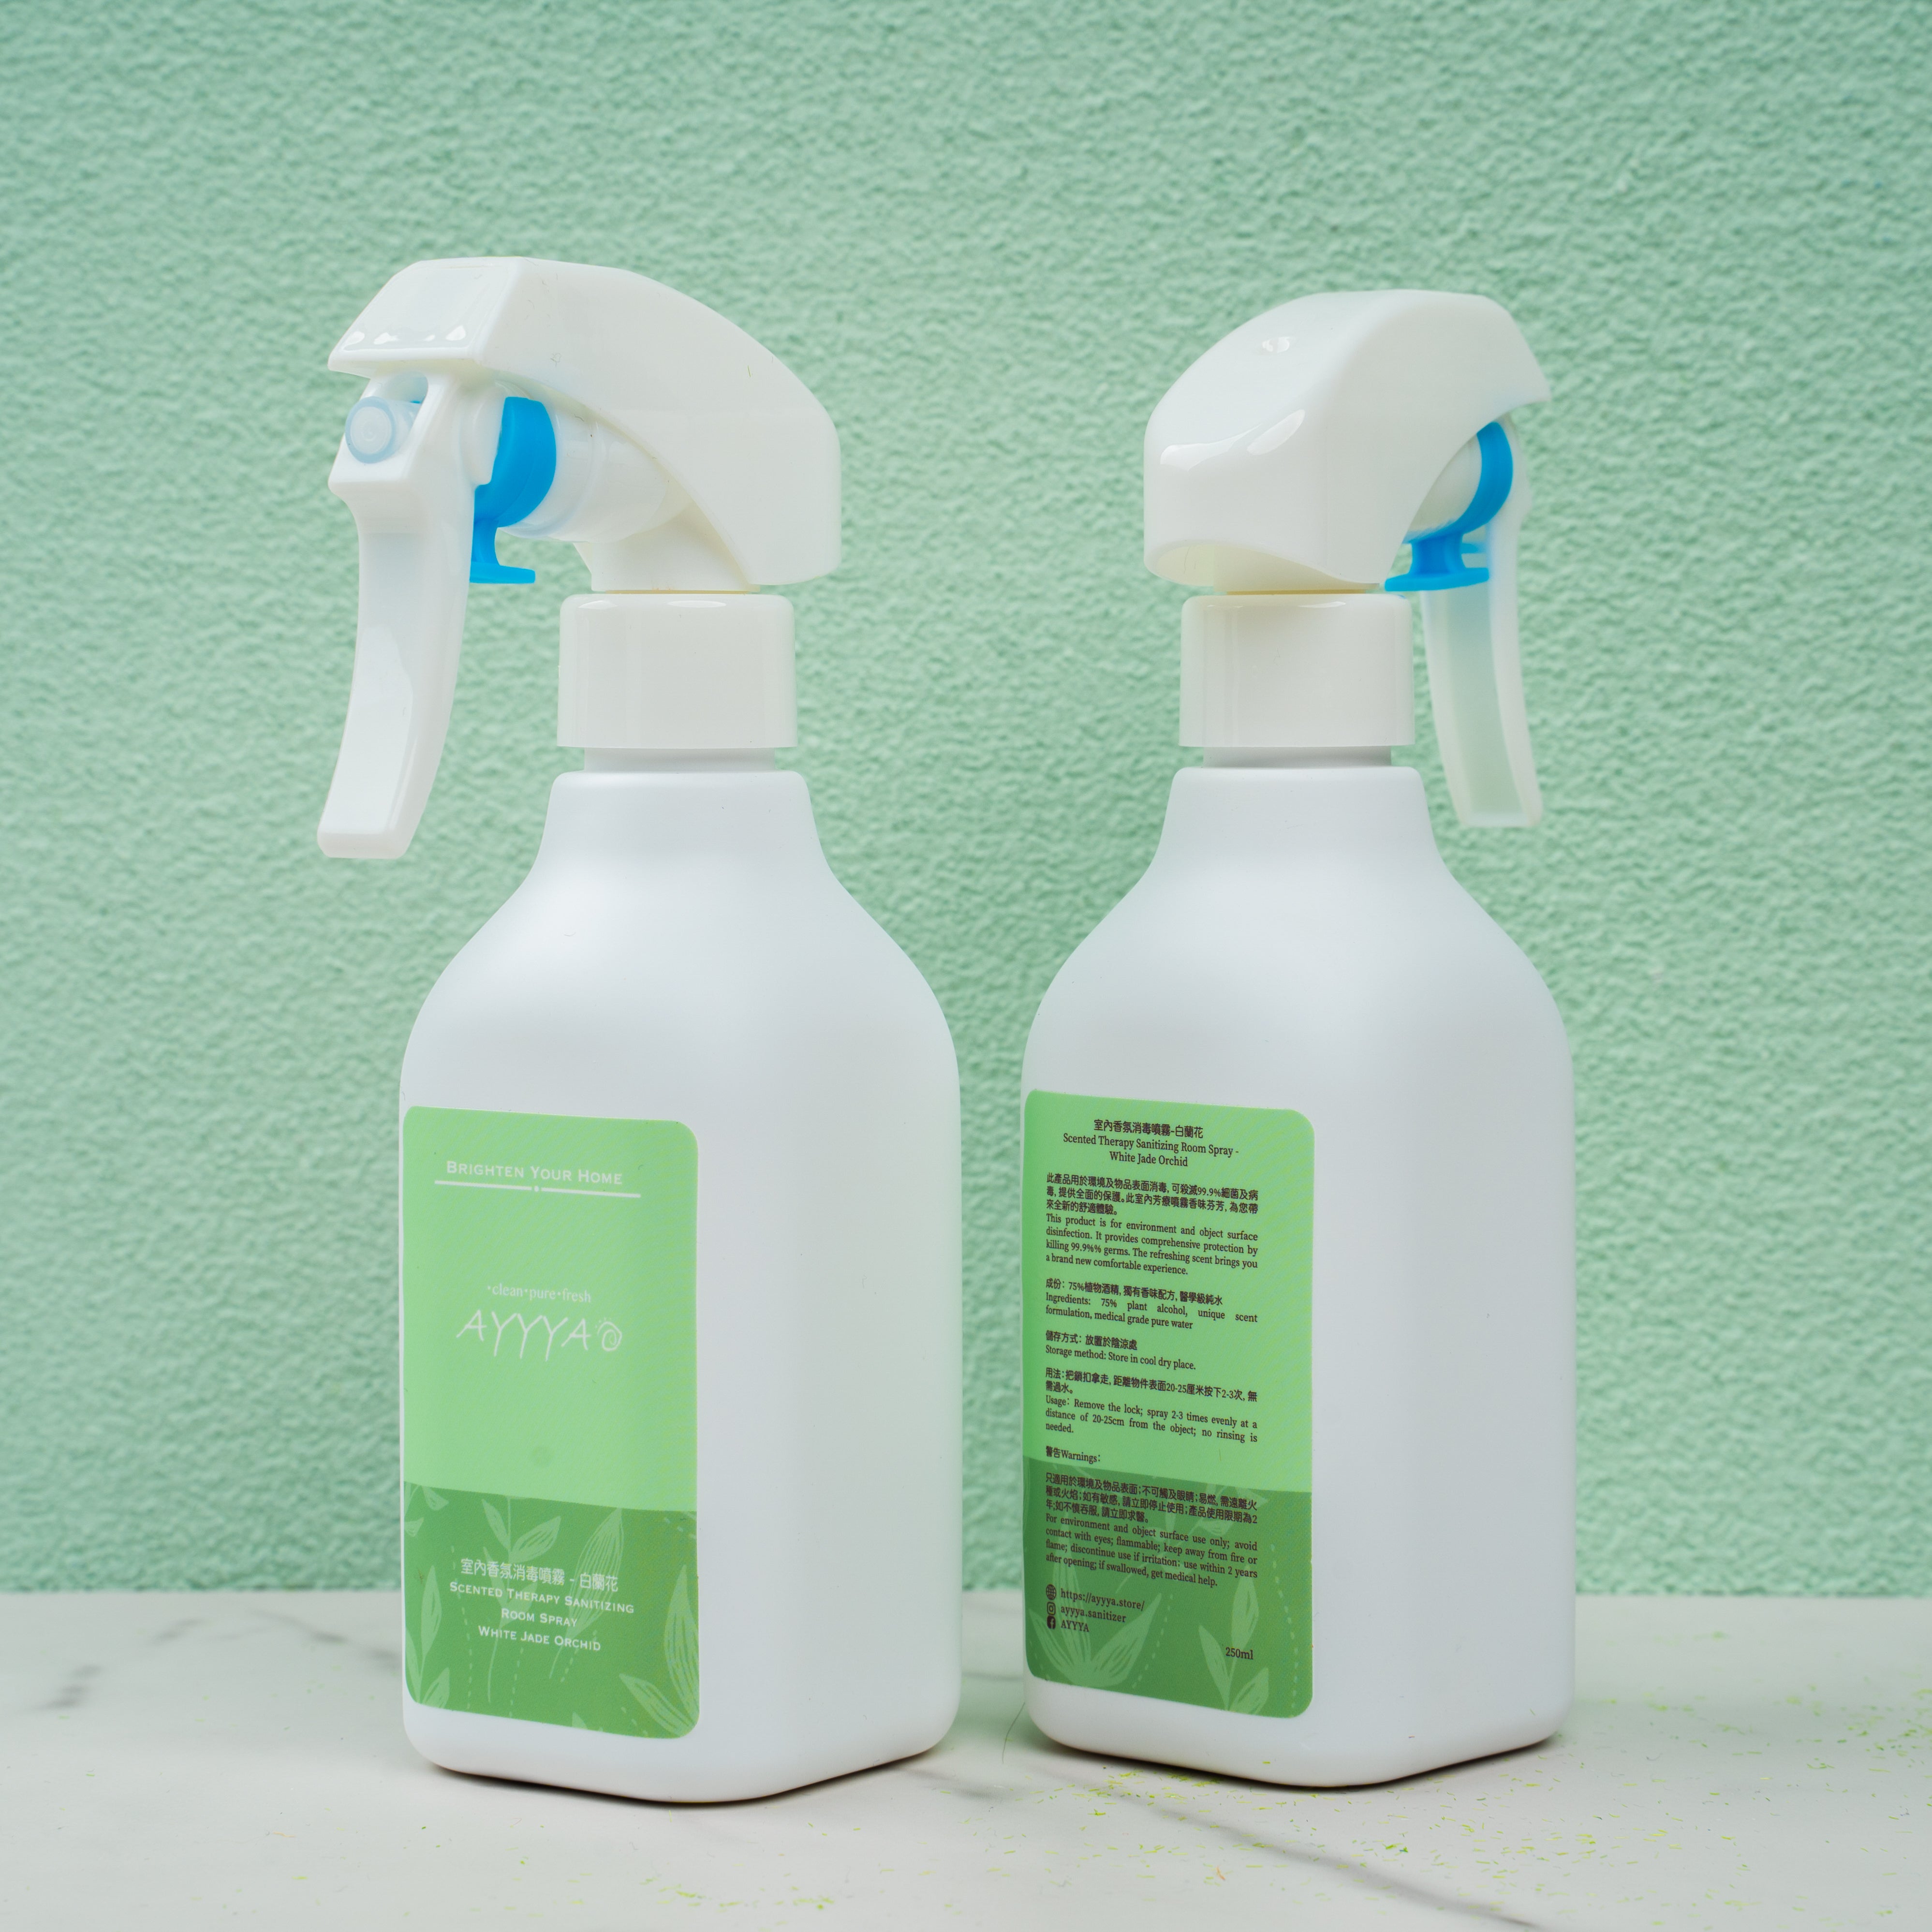 AYYYA Indoor Aromatherapy Disinfectant Spray- White Orchid